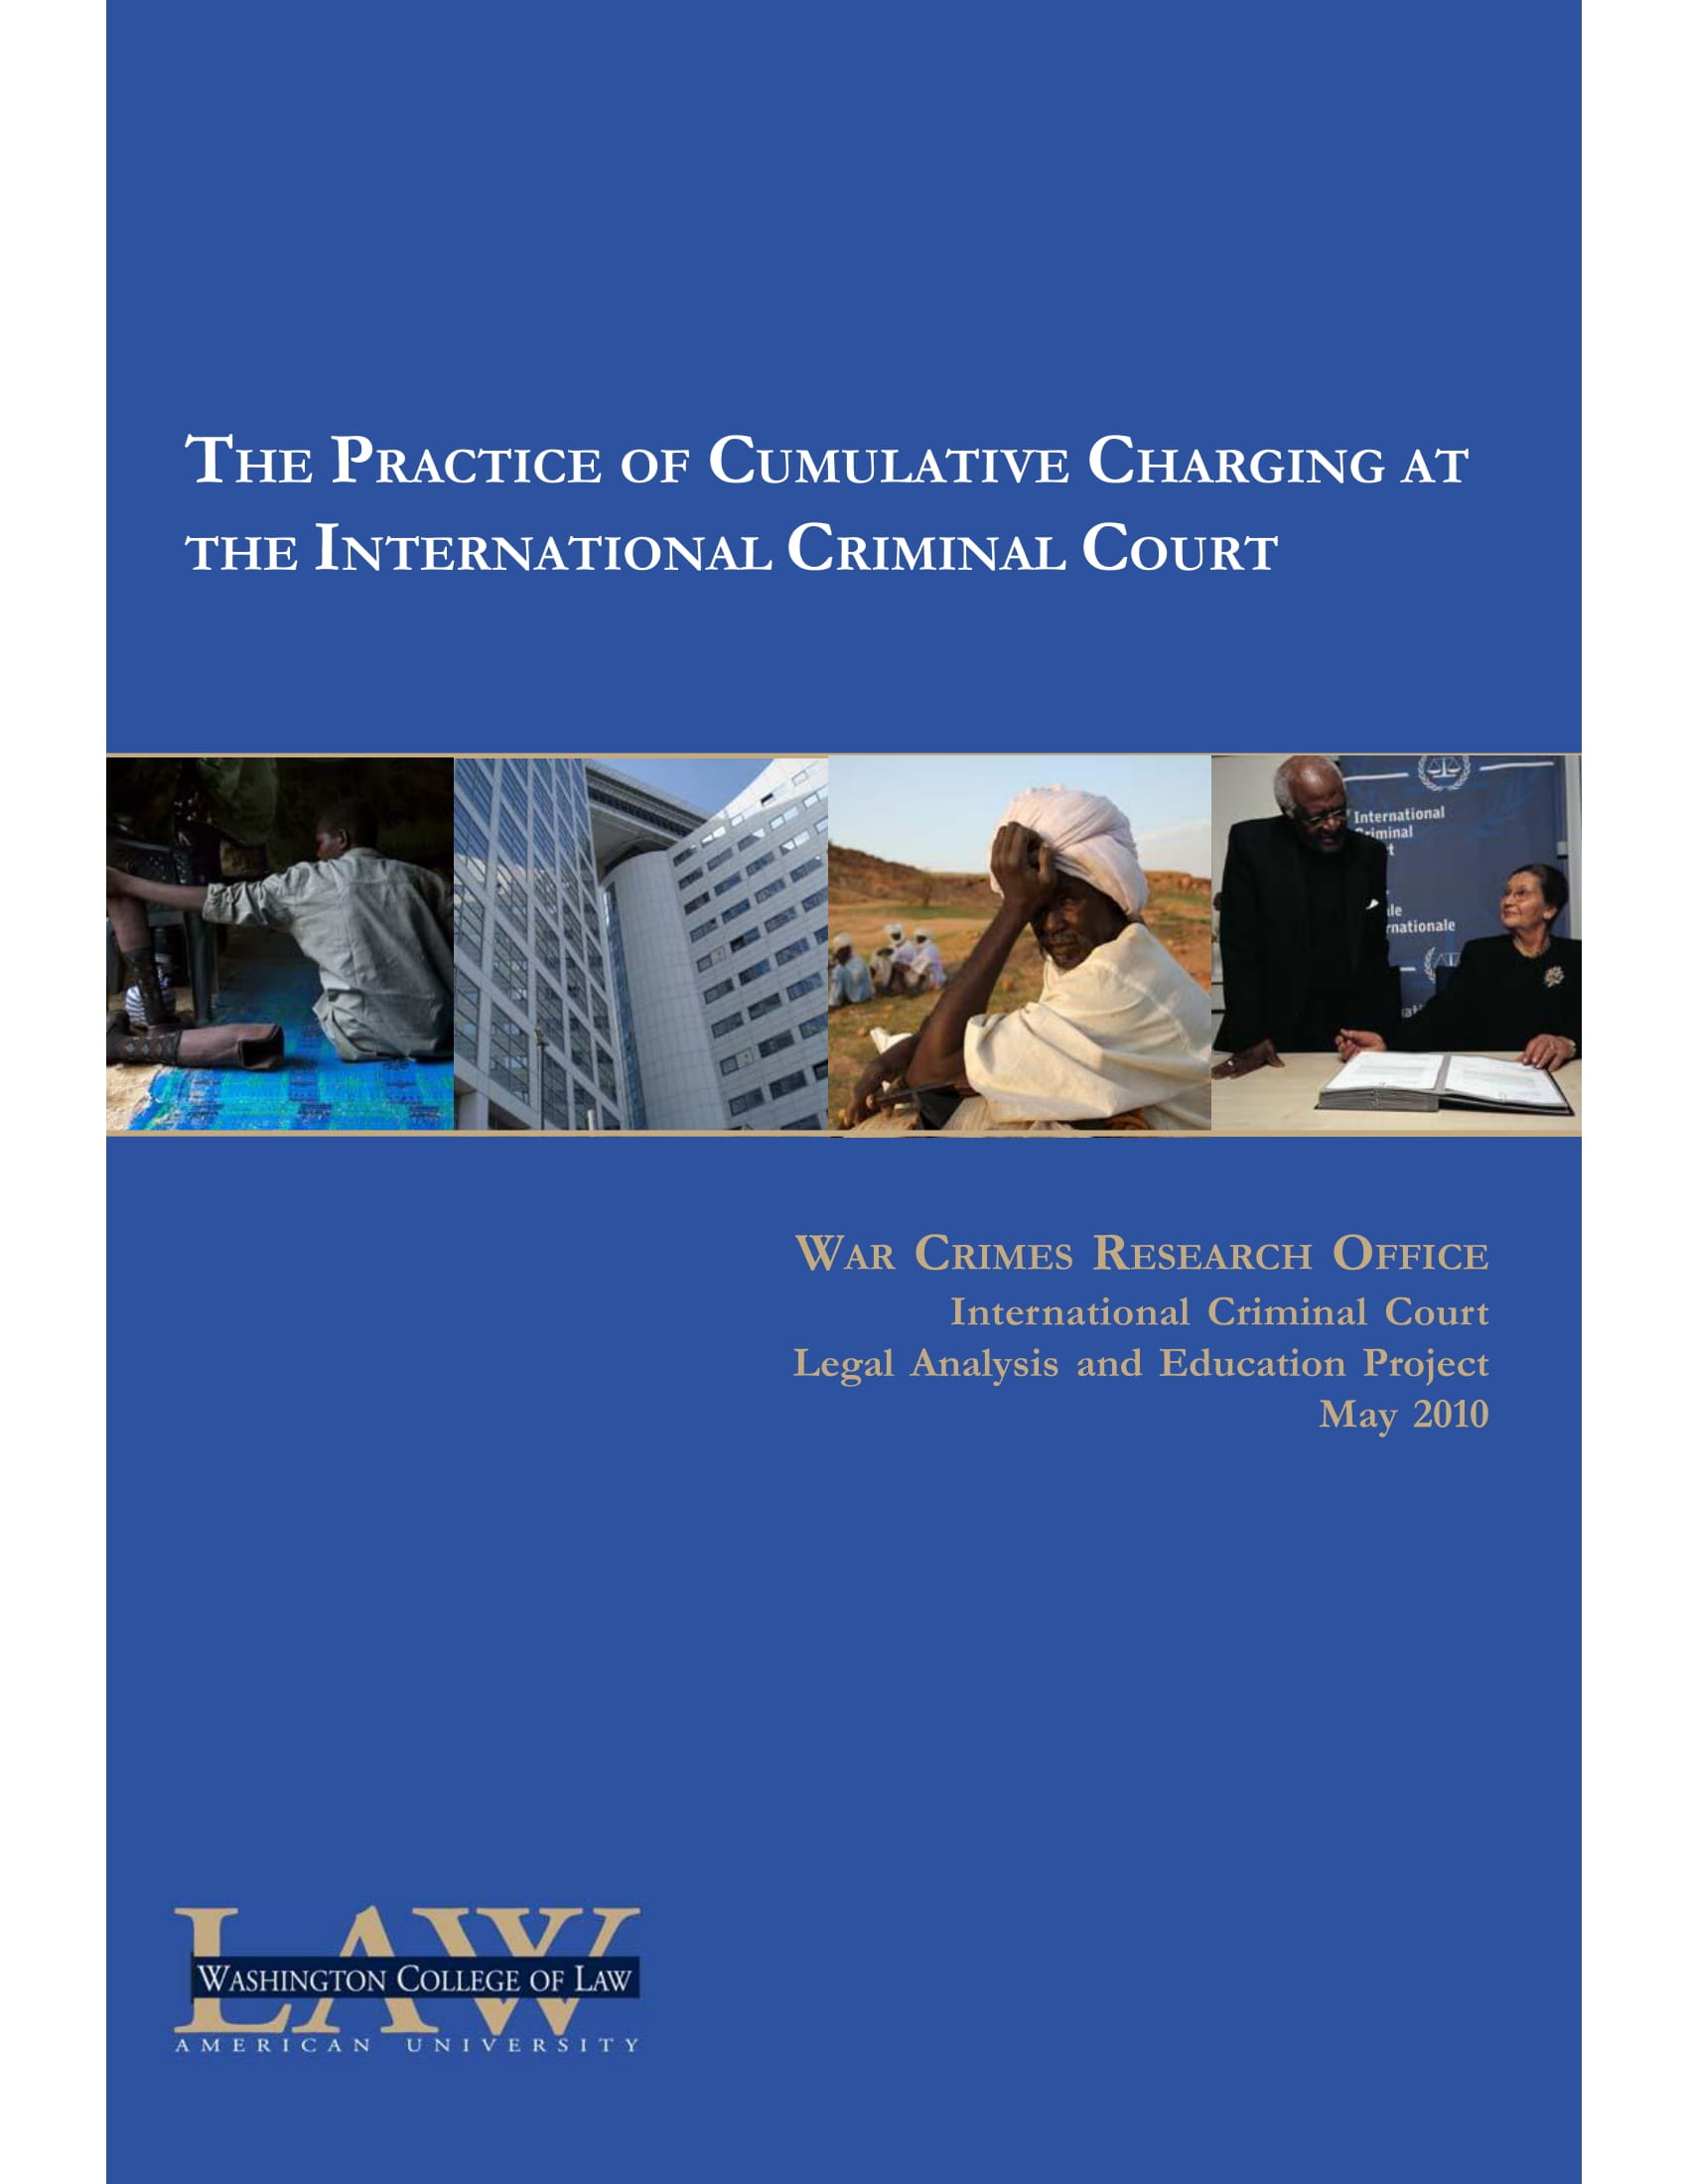 Report 11: The Practice of Cumulative Charging at the ICC